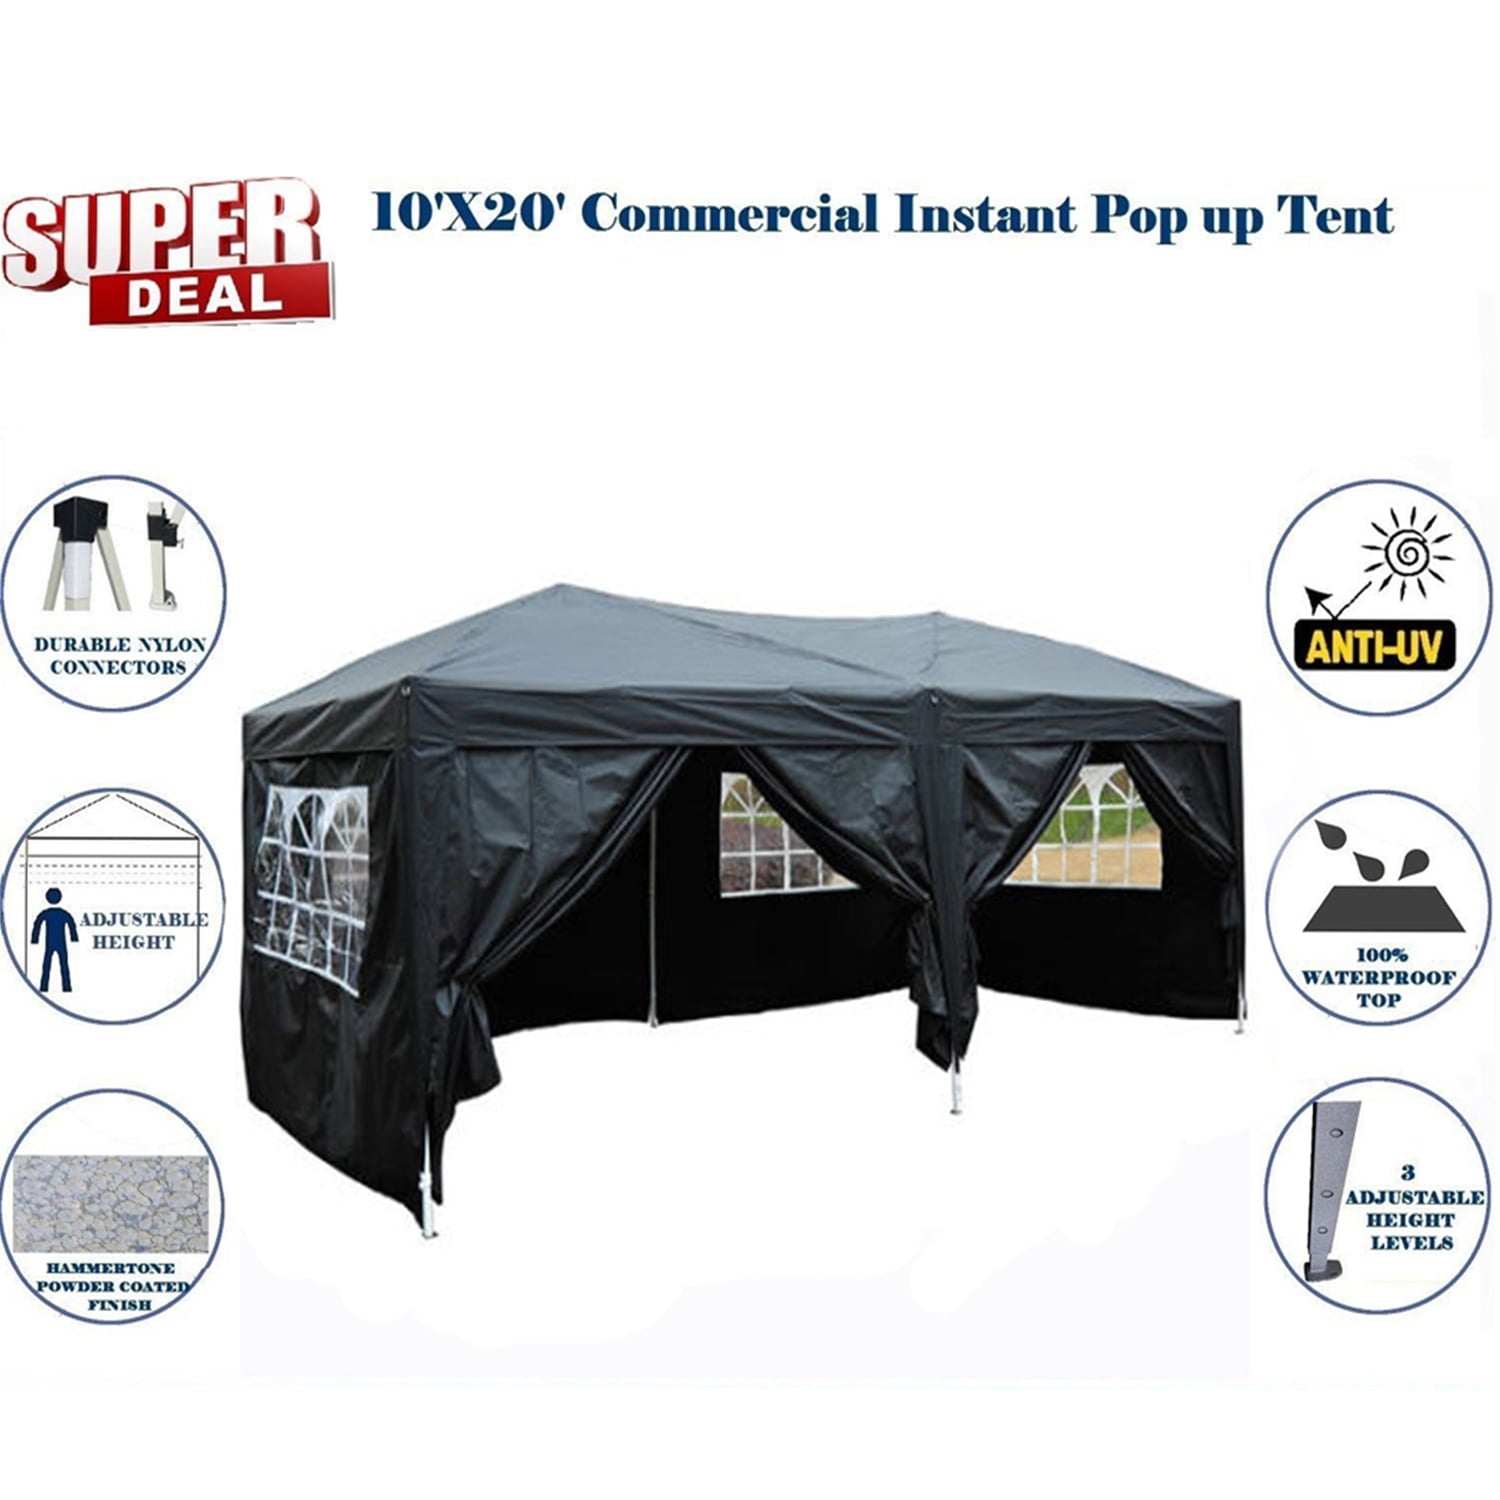 Zimtown Outdoor Easy Pop Up Tent Party Canopy Gazebo with 6 Walls 10' x 20' Black